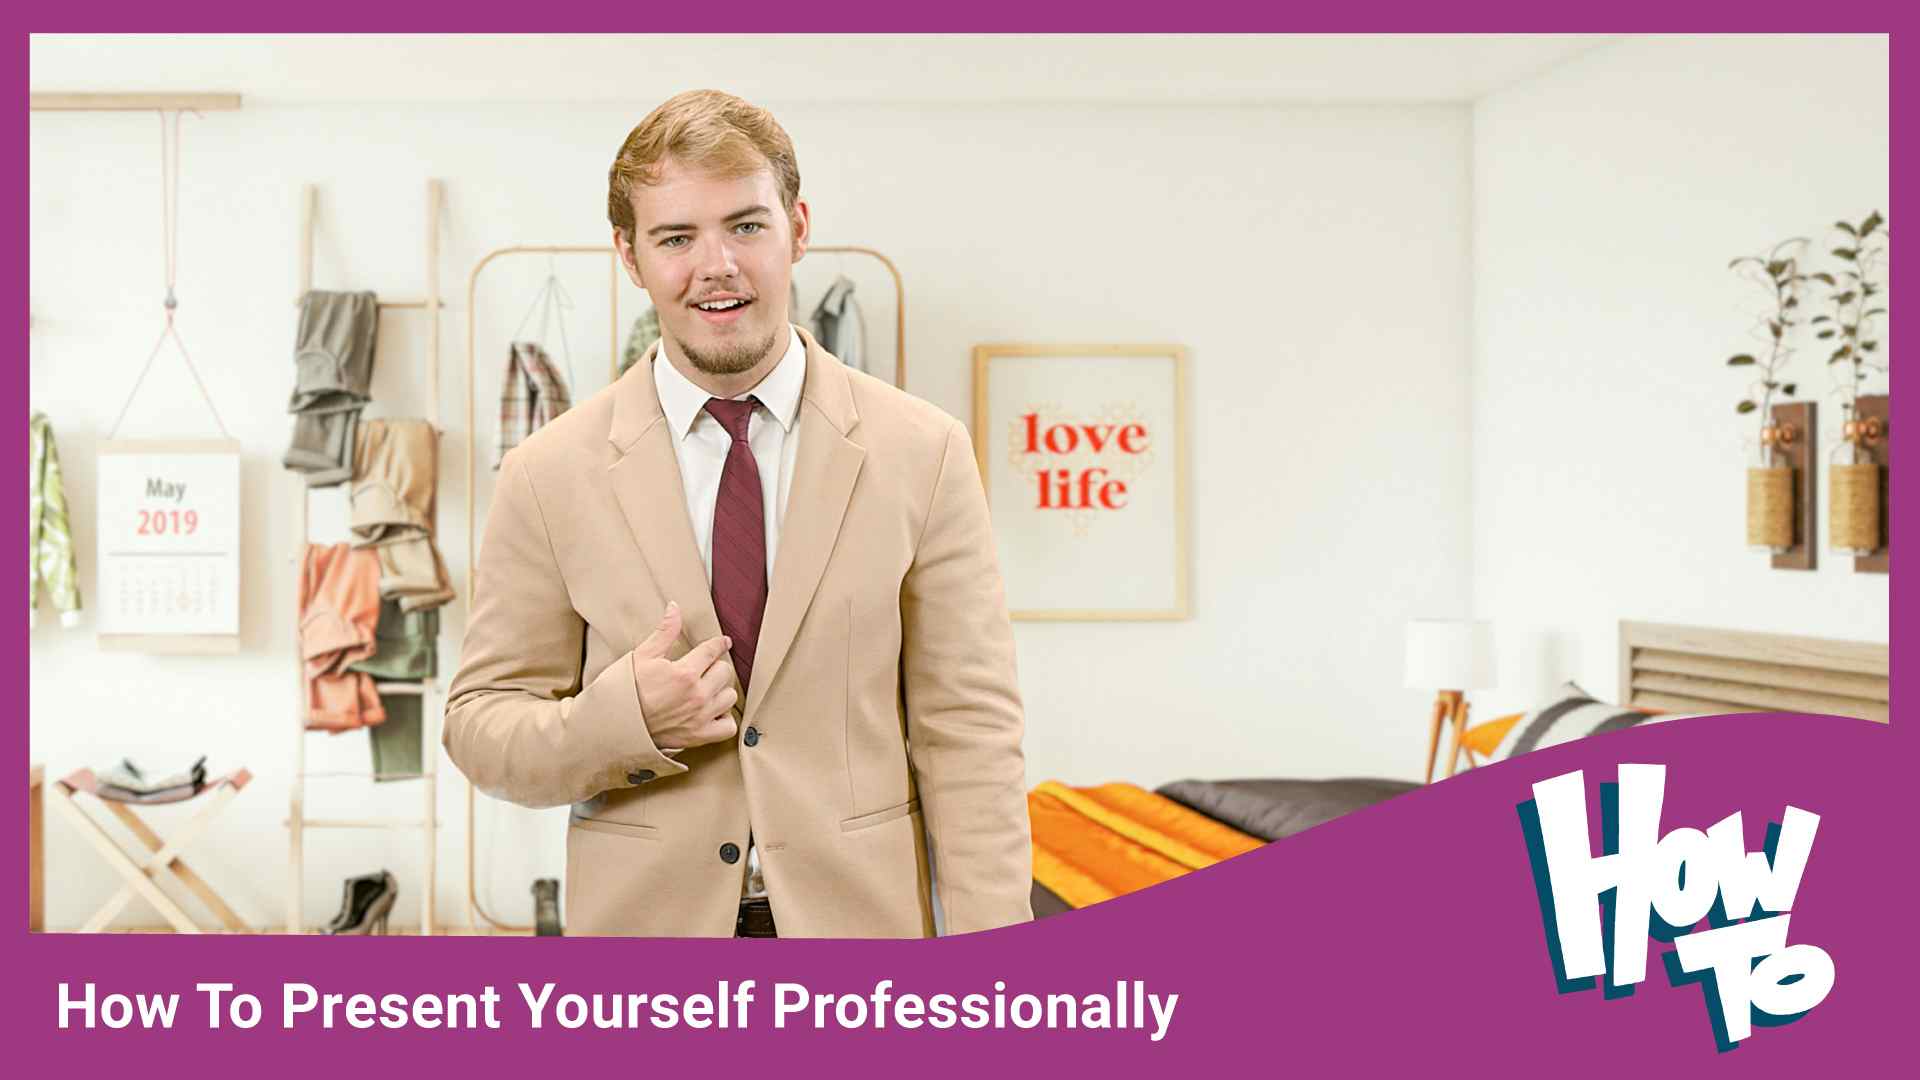 How To Present Yourself Professionally